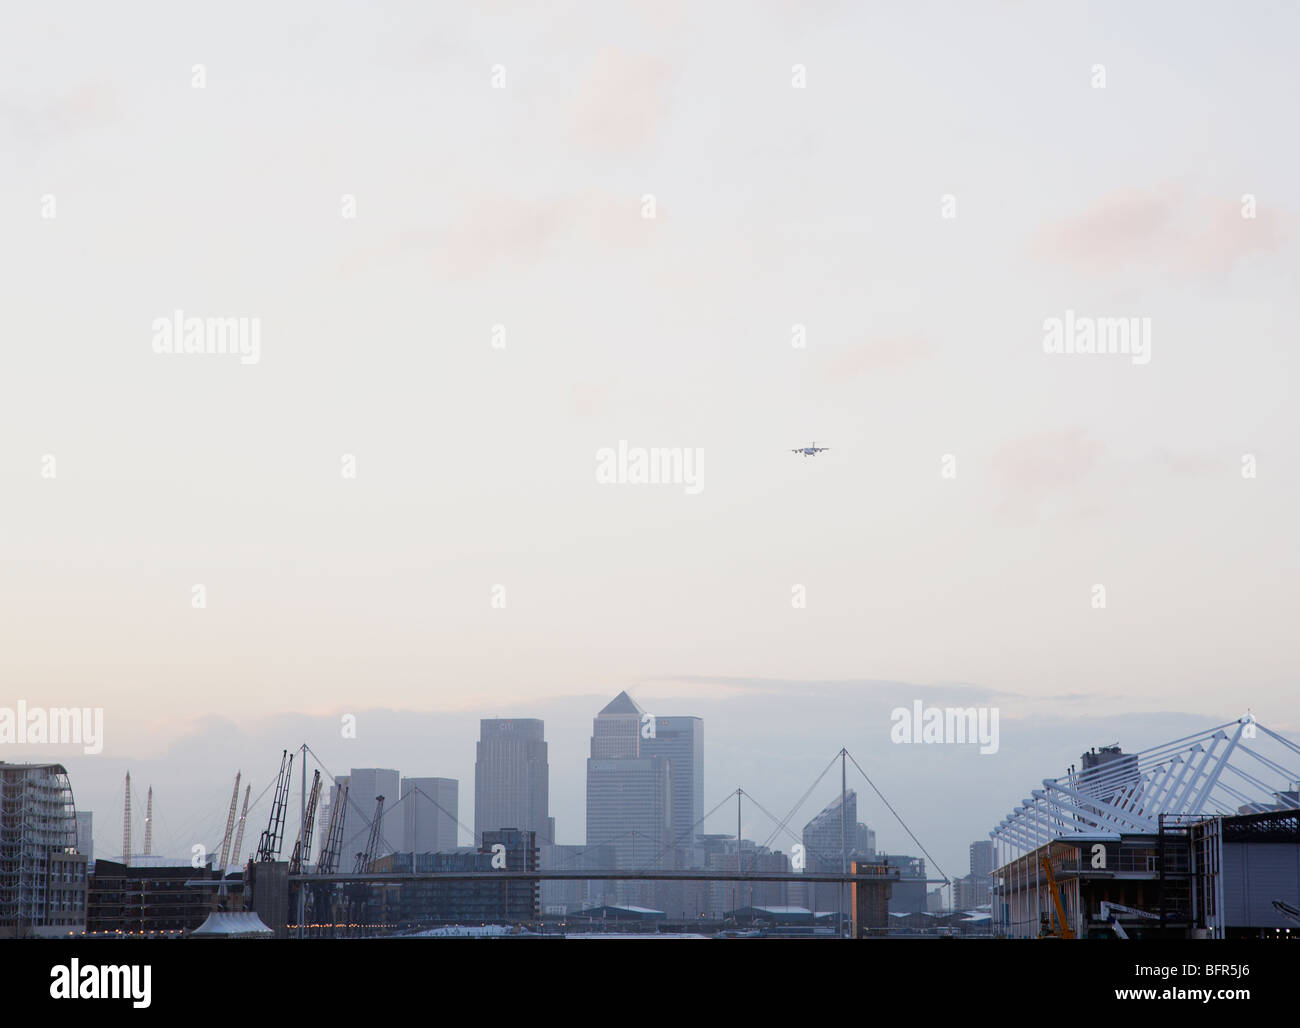 plane on its approach into London City Airport with view of Canary wharf in the background Stock Photo